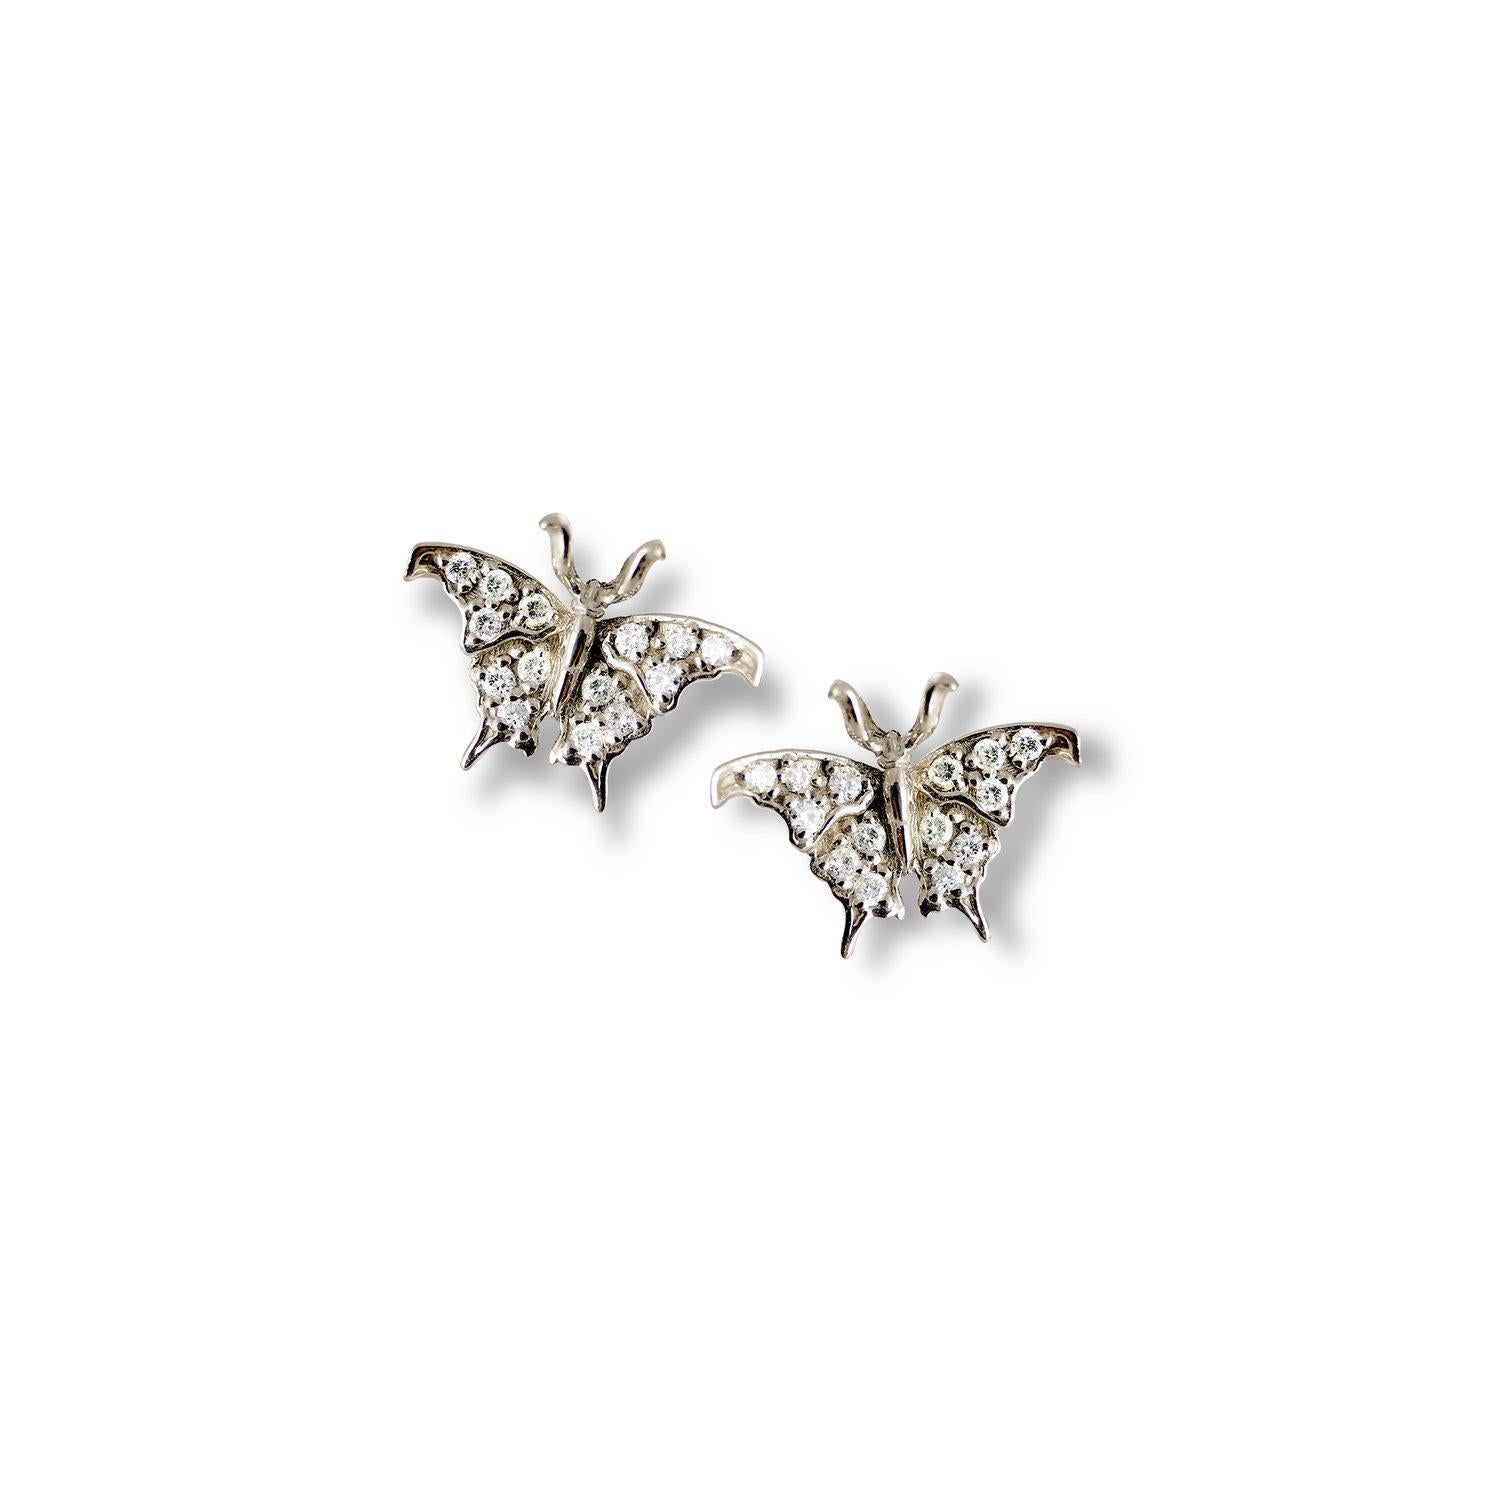 Experience the enchantment of delicate beauty with our Small Butterfly Diamond Earrings in captivating yellow gold. These mesmerizing earrings will transform your ears into alluring apricot blossoms, radiating an irresistible charm.

Crafted with